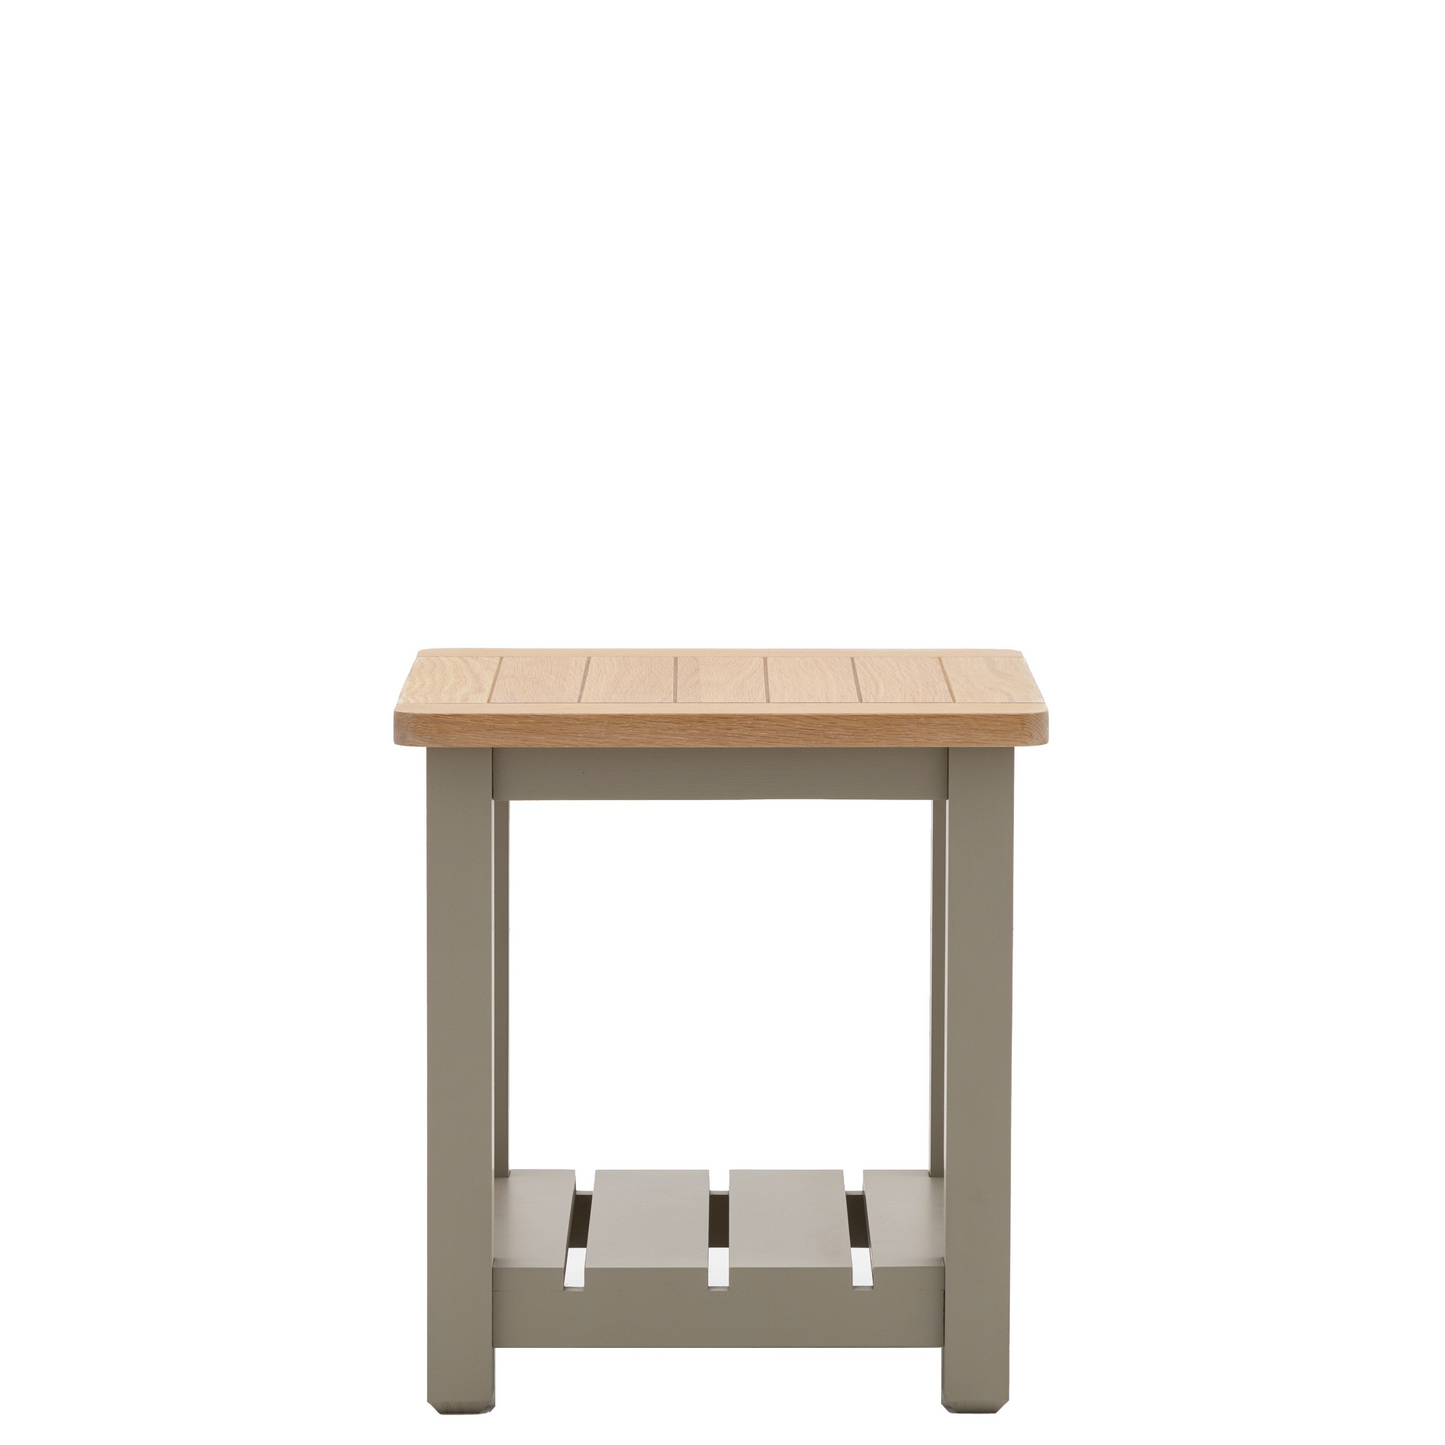 A small Buckland Side Table in Prairie designed for interior decor with a wooden top.